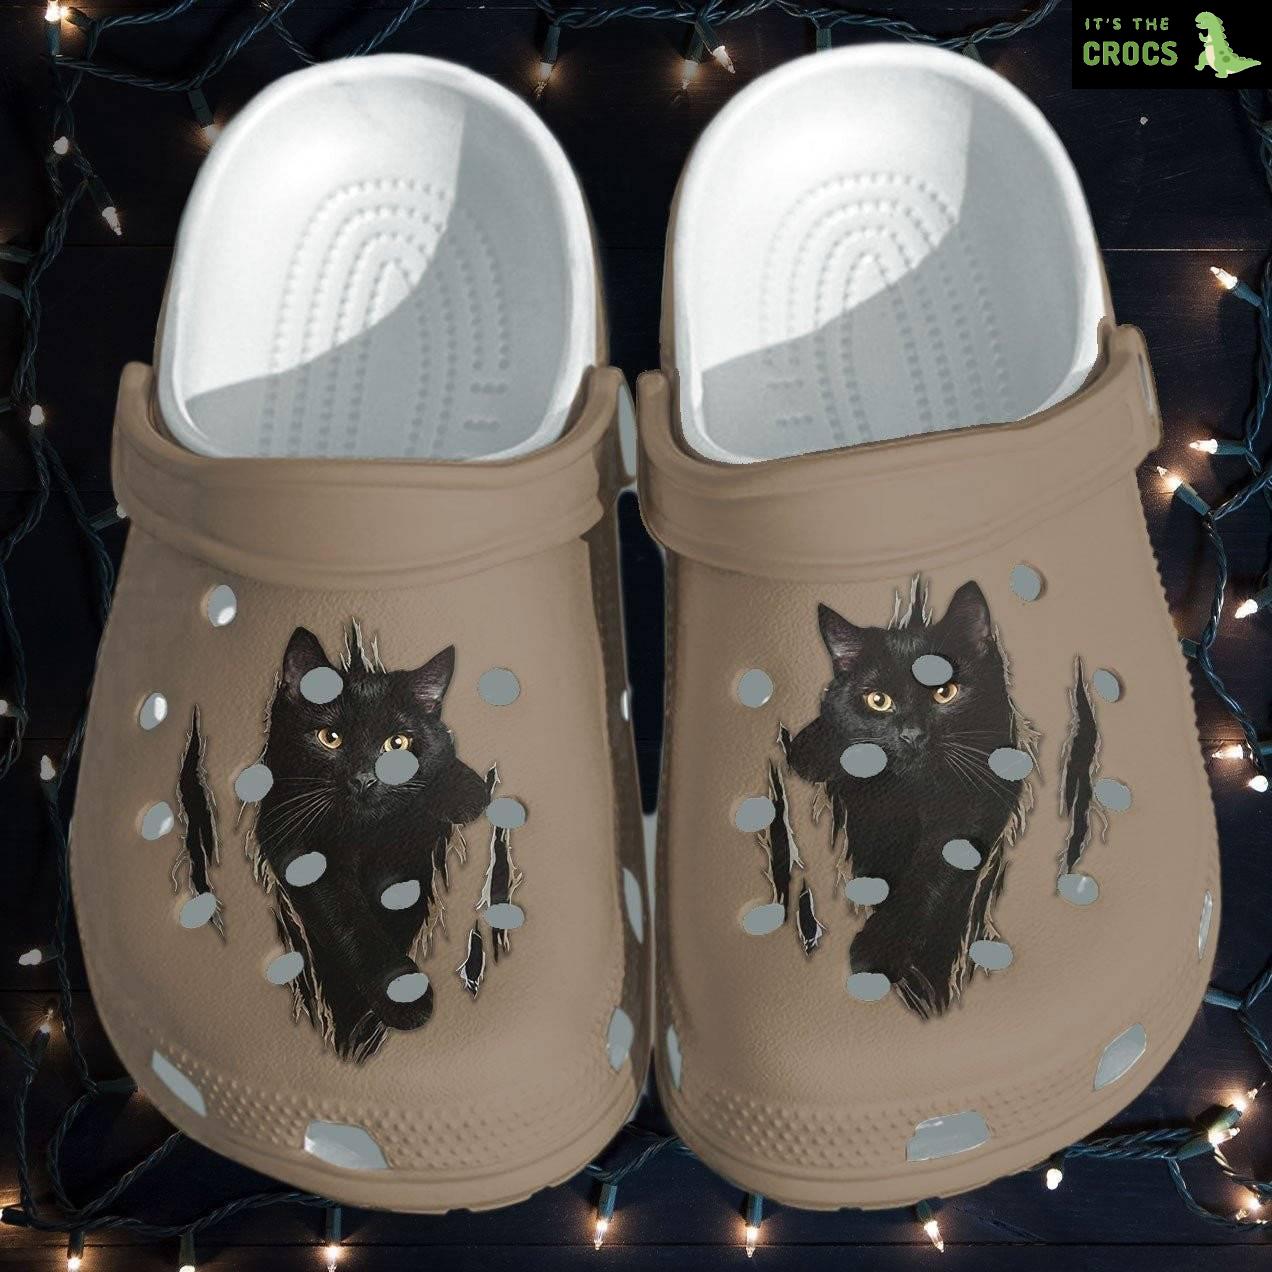 Black Cat Crocbland Clog Crocs Shoes Gifts For Cat Lover